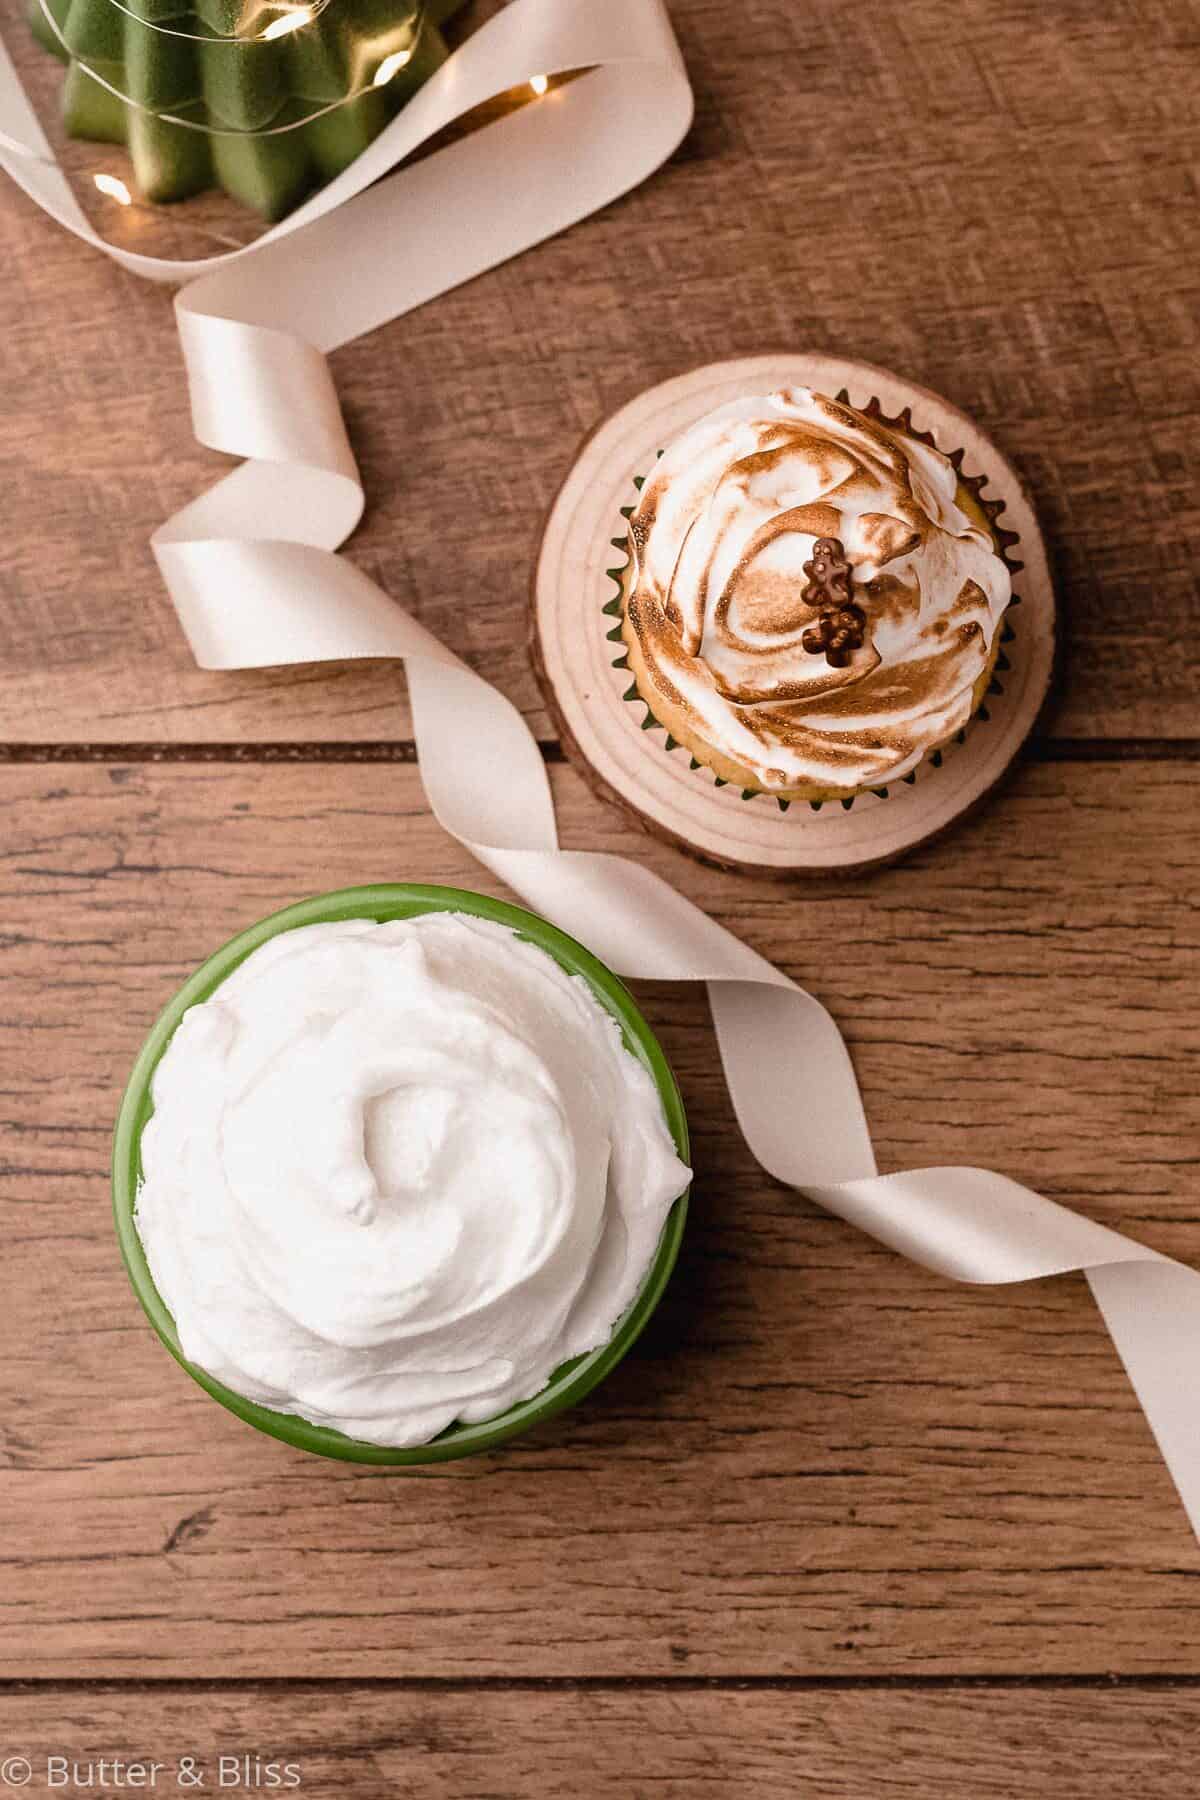 Frosting for a Christmas cupcake in a bowl next to a cupcake.